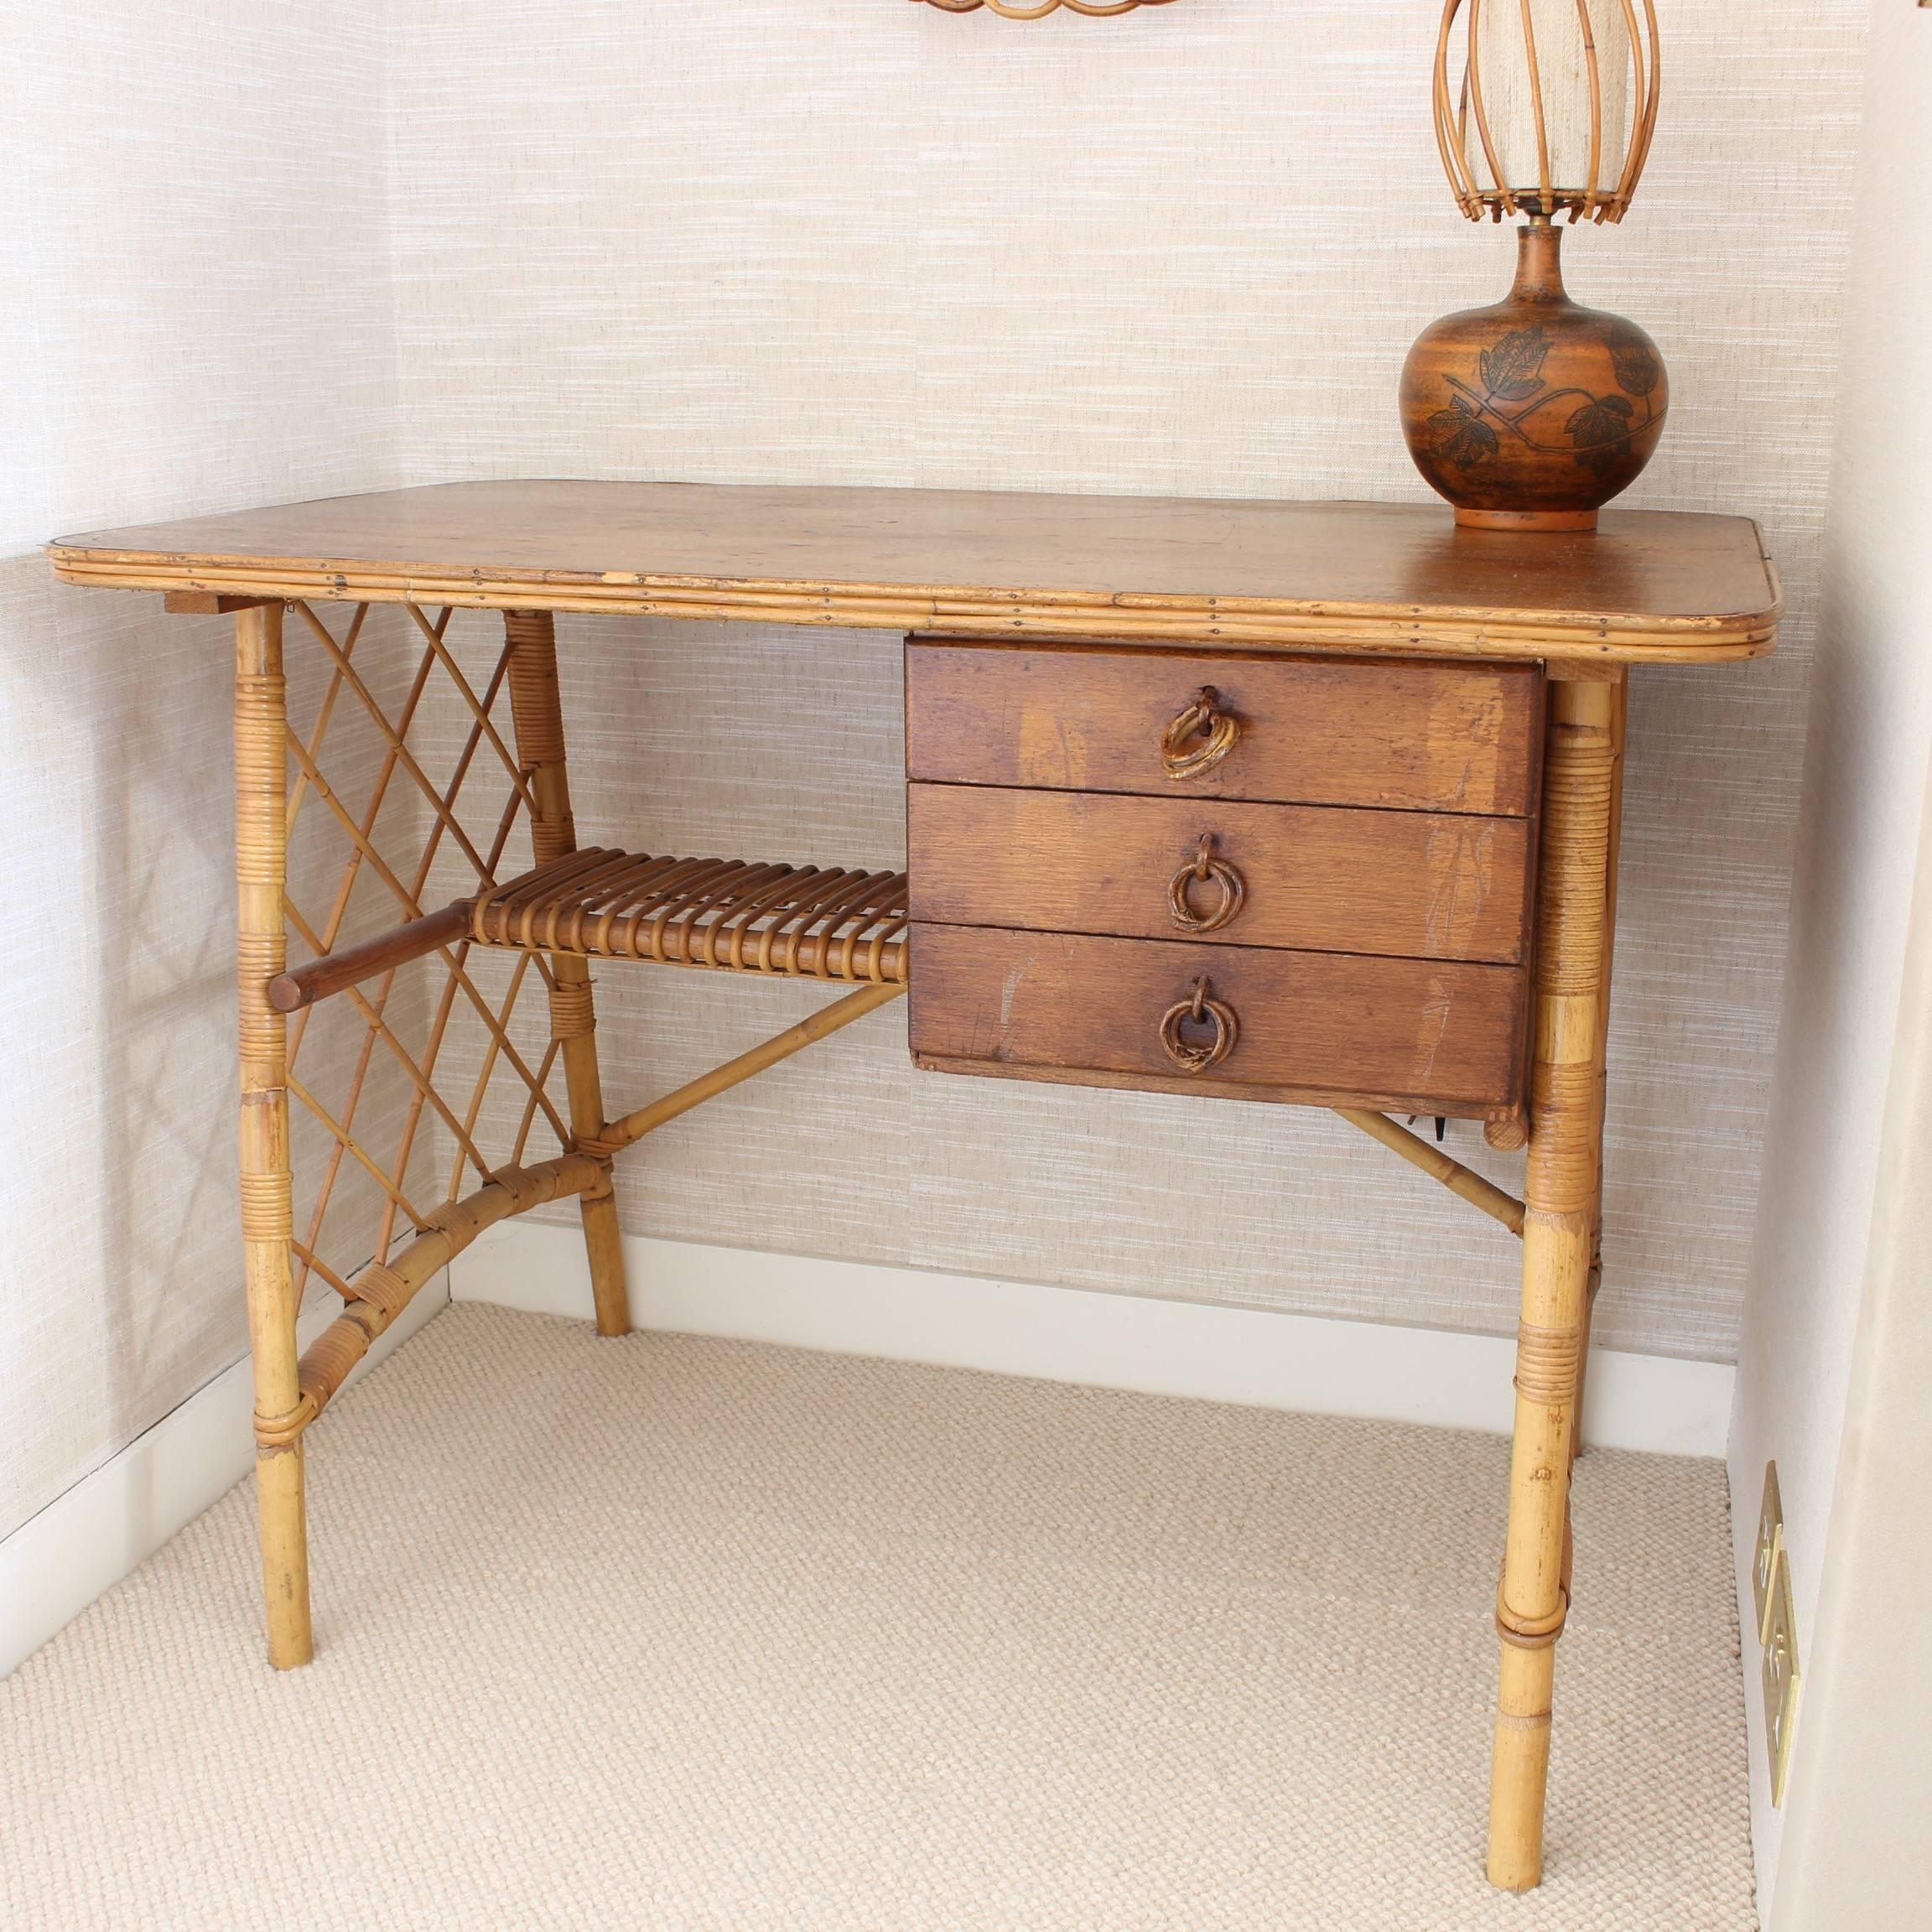 Rattan desk or vanity table by Louis Sognot, circa 1950s. Characteristic of its period, there are three drawers located under this rattan desk as well as a storage shelf. Rattan grilled panels connect the side legs. The desktop is edged with rattan